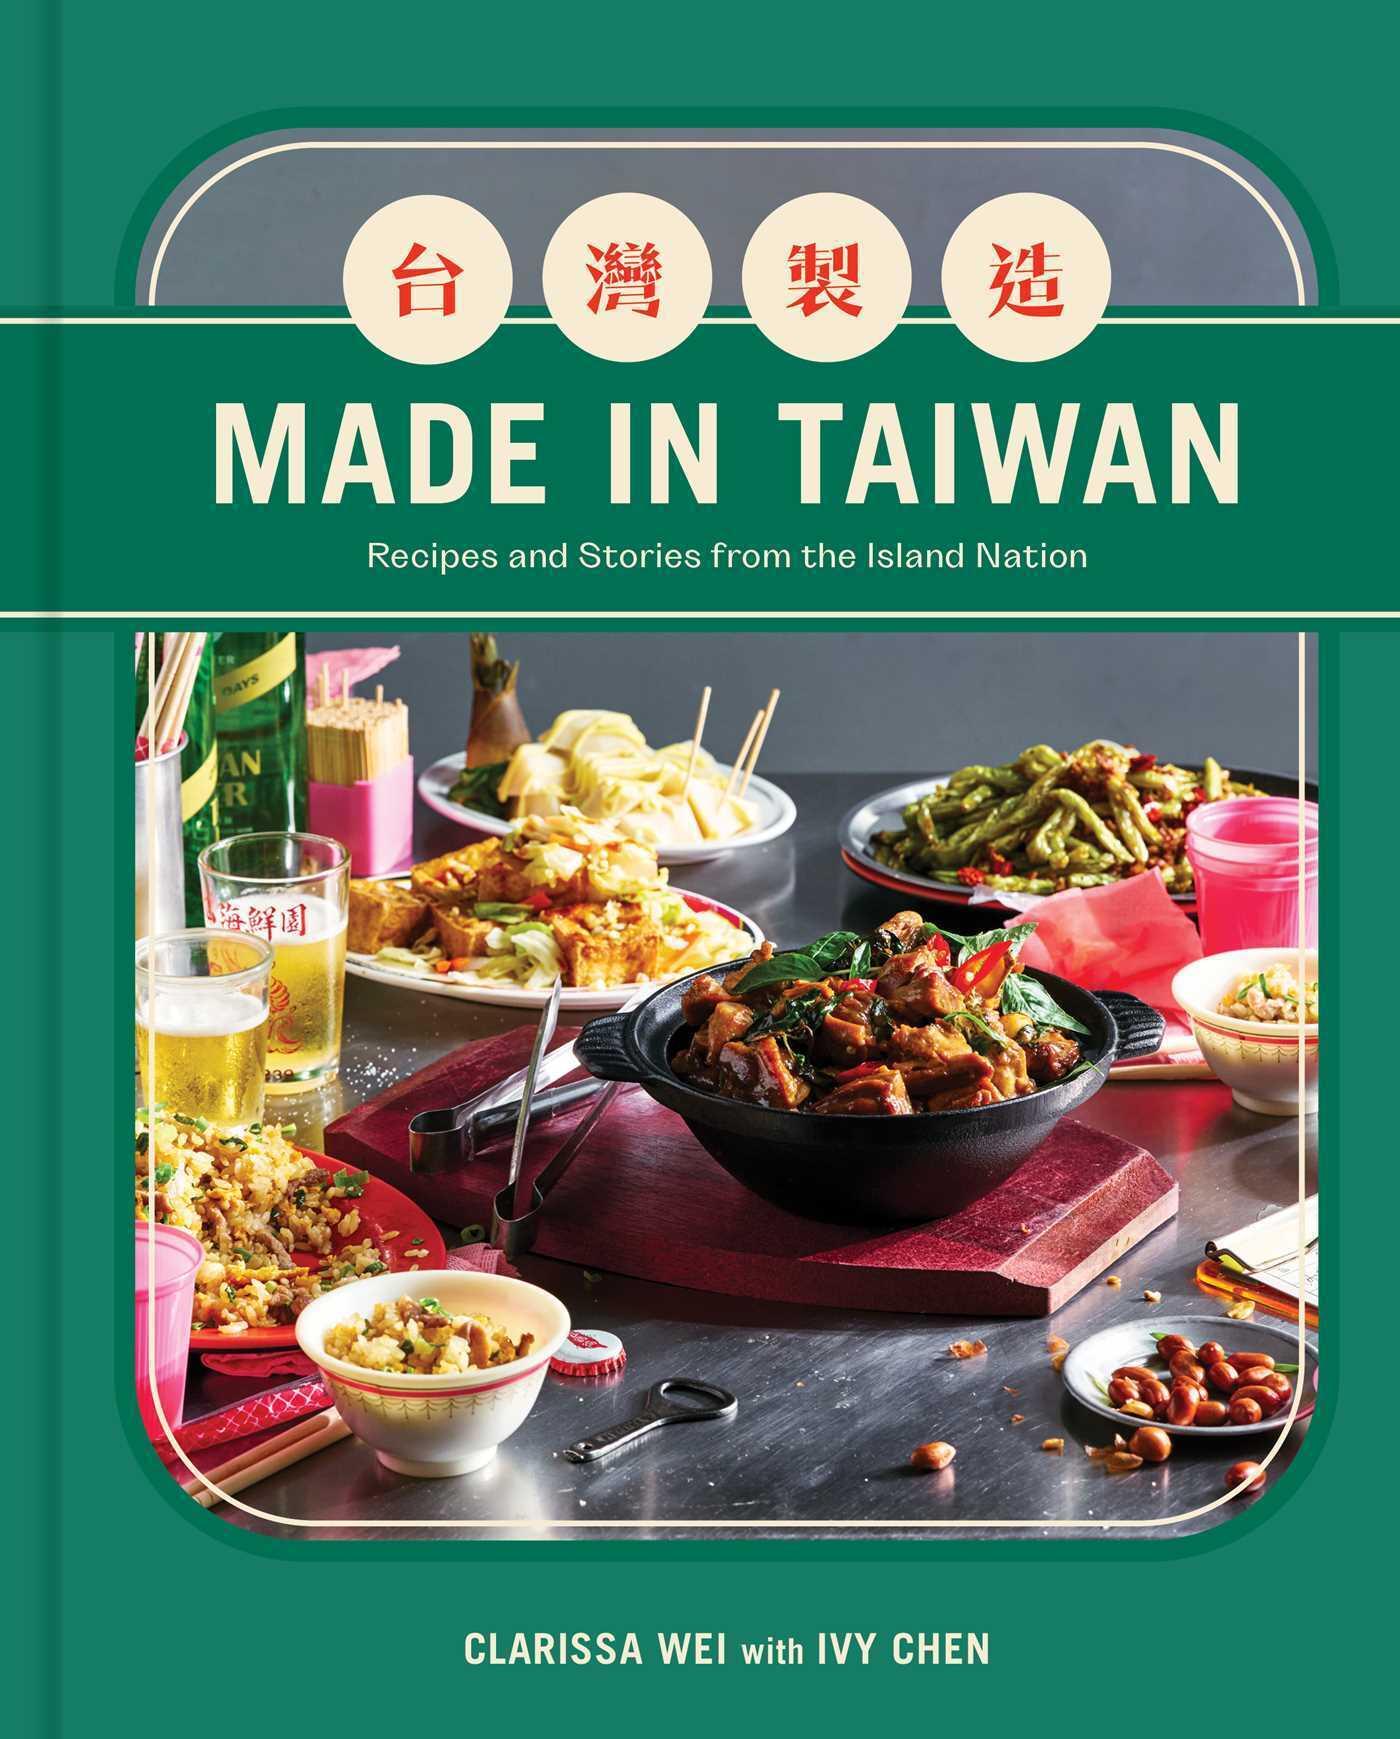 The cover of the Taiwanese cookbook Made in Taiwan: Recipes and Stories from the Island Nation.